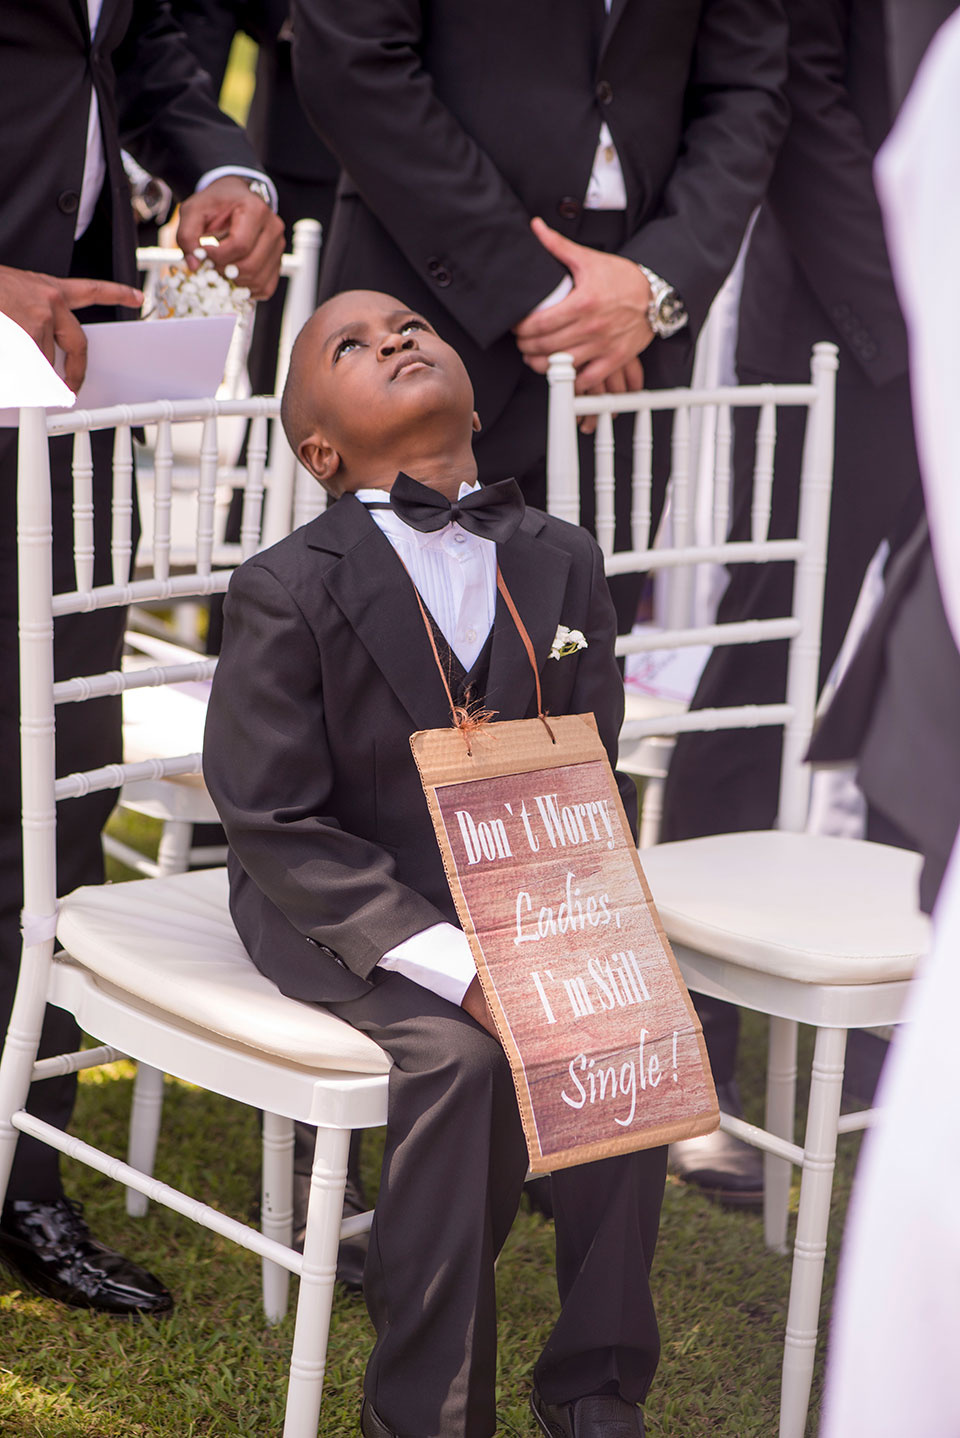 20 Activities To Make Your Wedding Day Interesting – Paramount Images ...